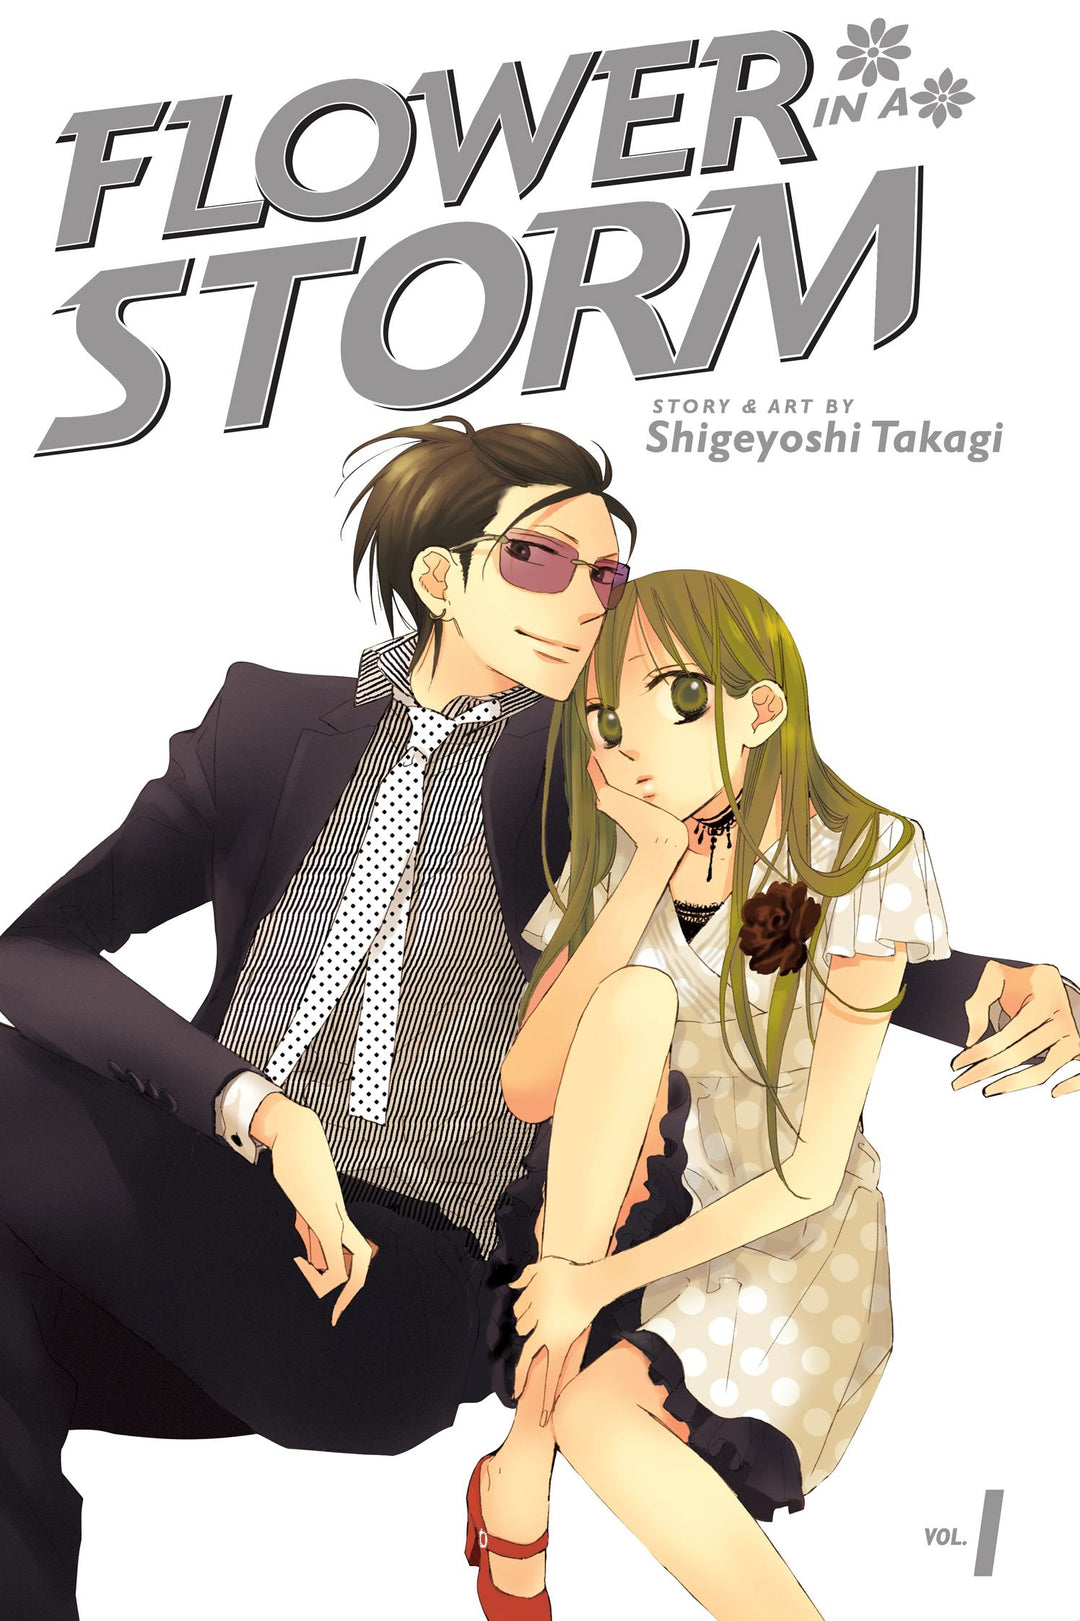 Flower in a Storm, Vol. 01